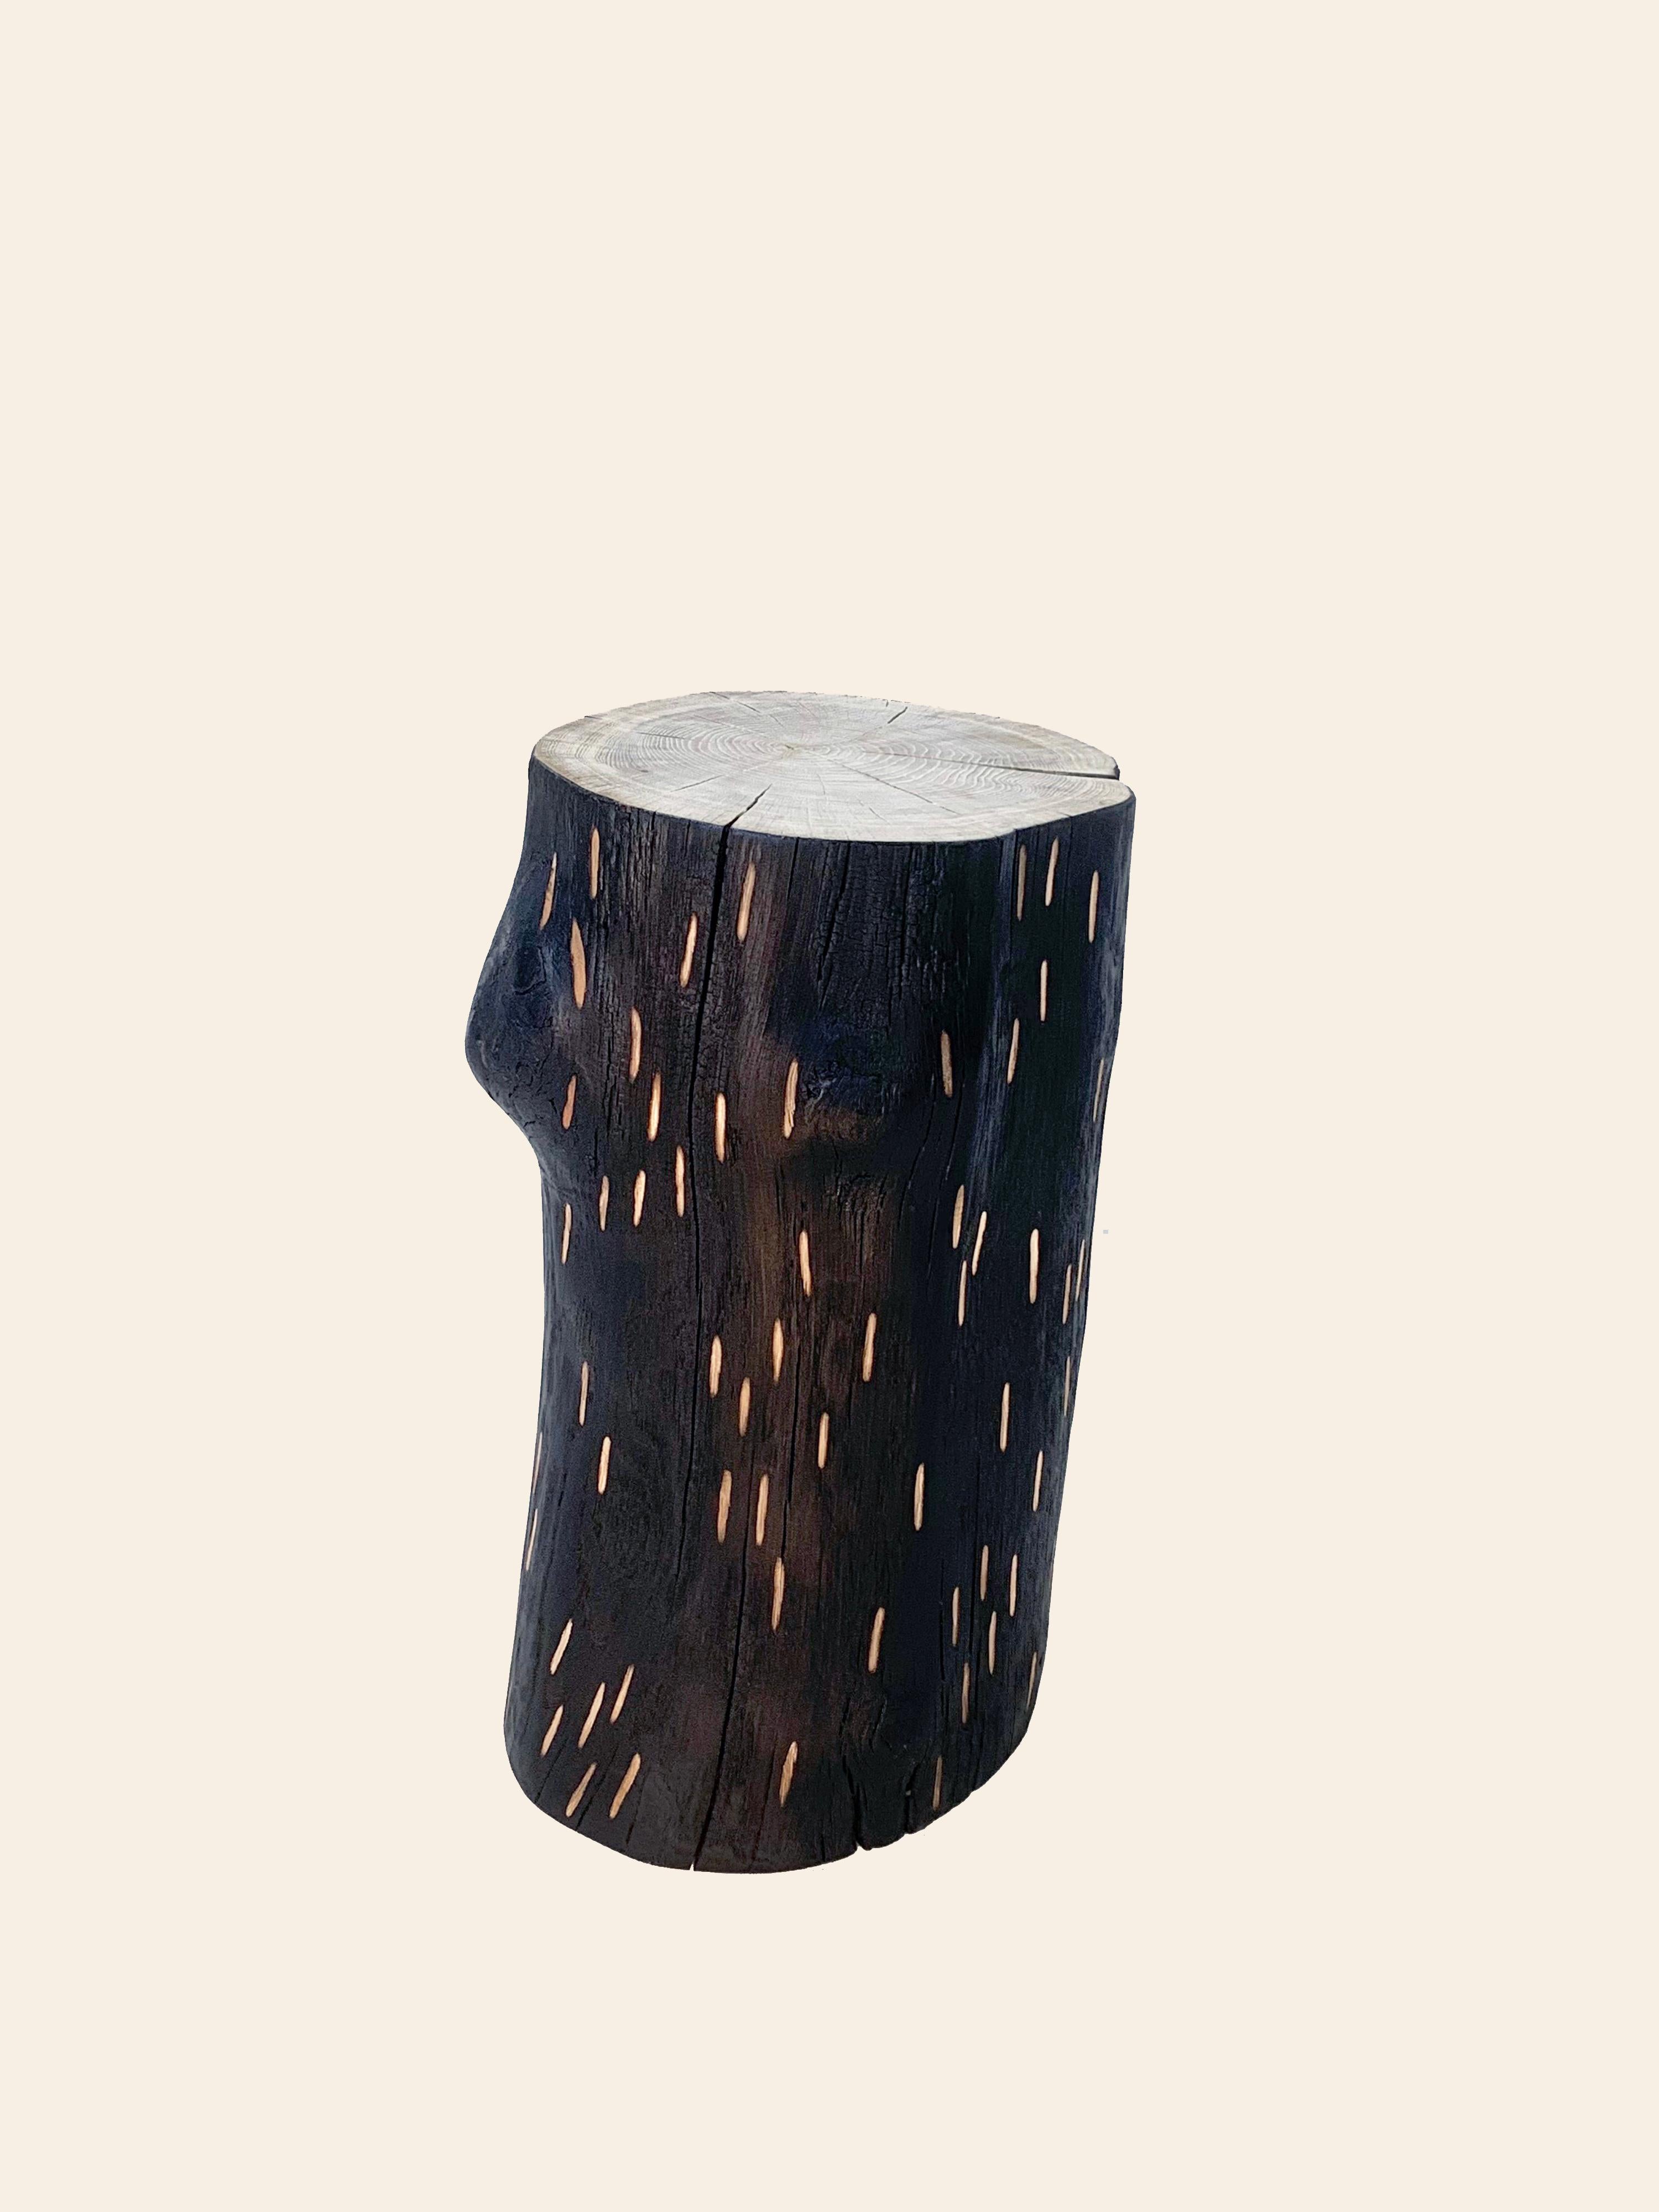 British 'Barking Up The Wrong Log' charred oak stool with hand carved markings